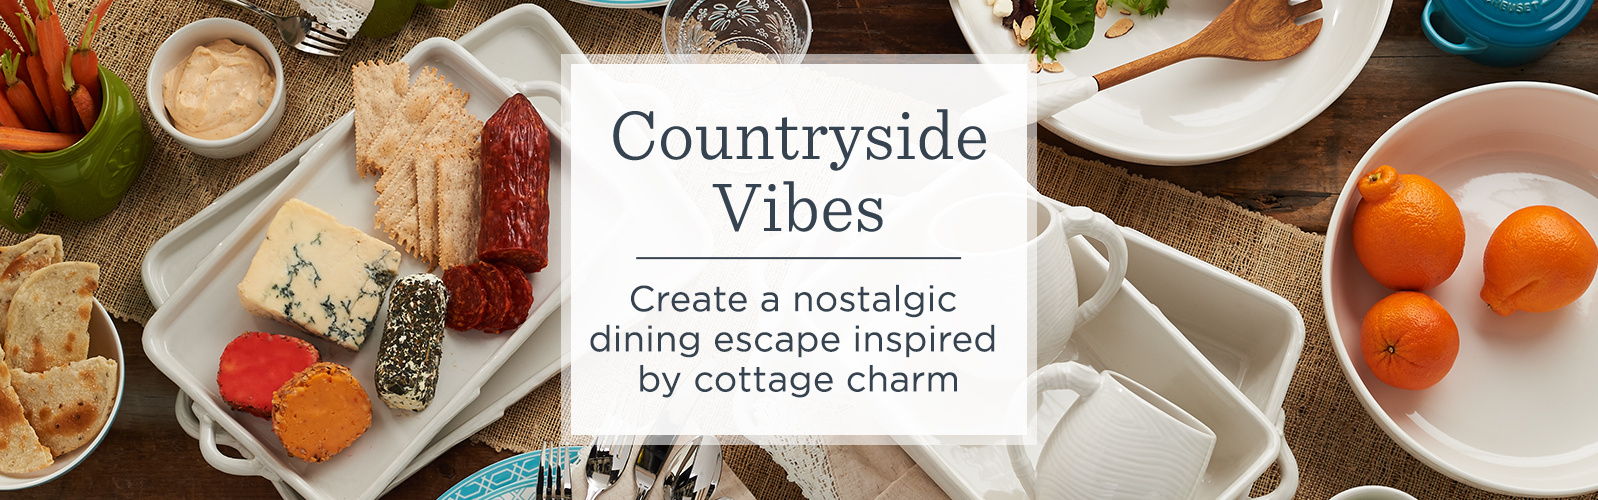 Countryside Vibes. Create a nostalgic dining escape inspired by cottage charm